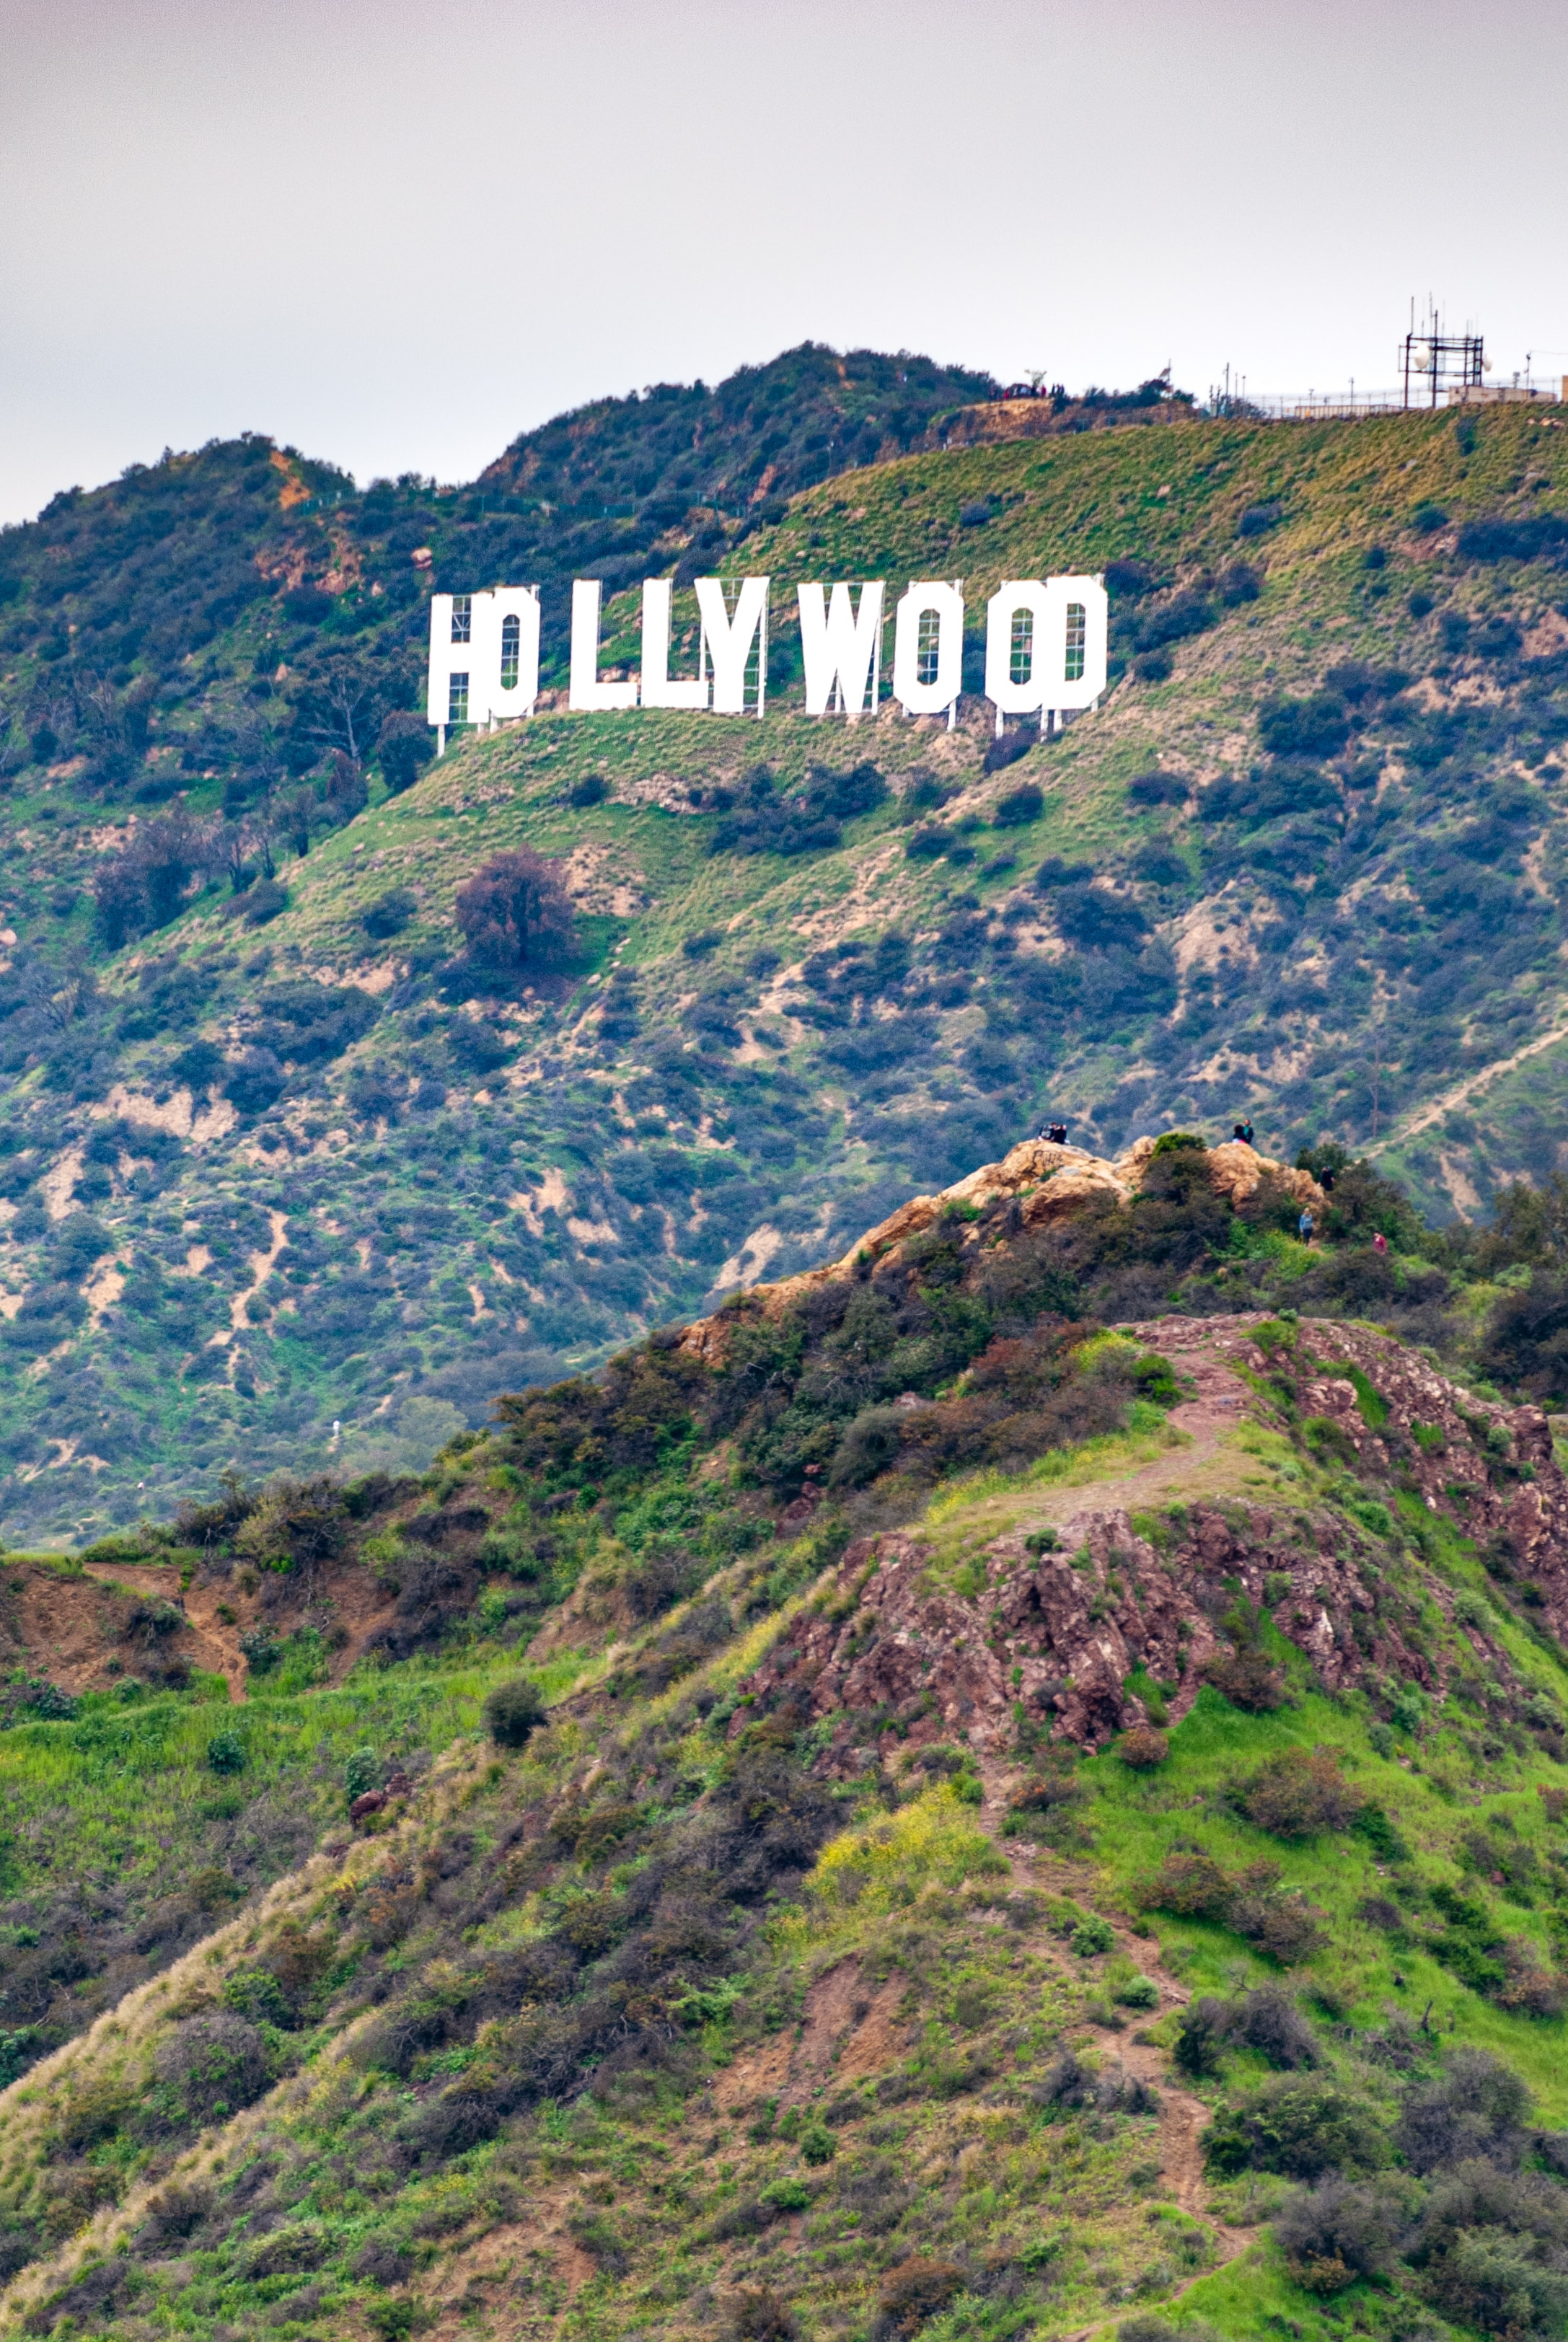 Cool Wallpapers rocks, words, inscription, slope, word, hollywood